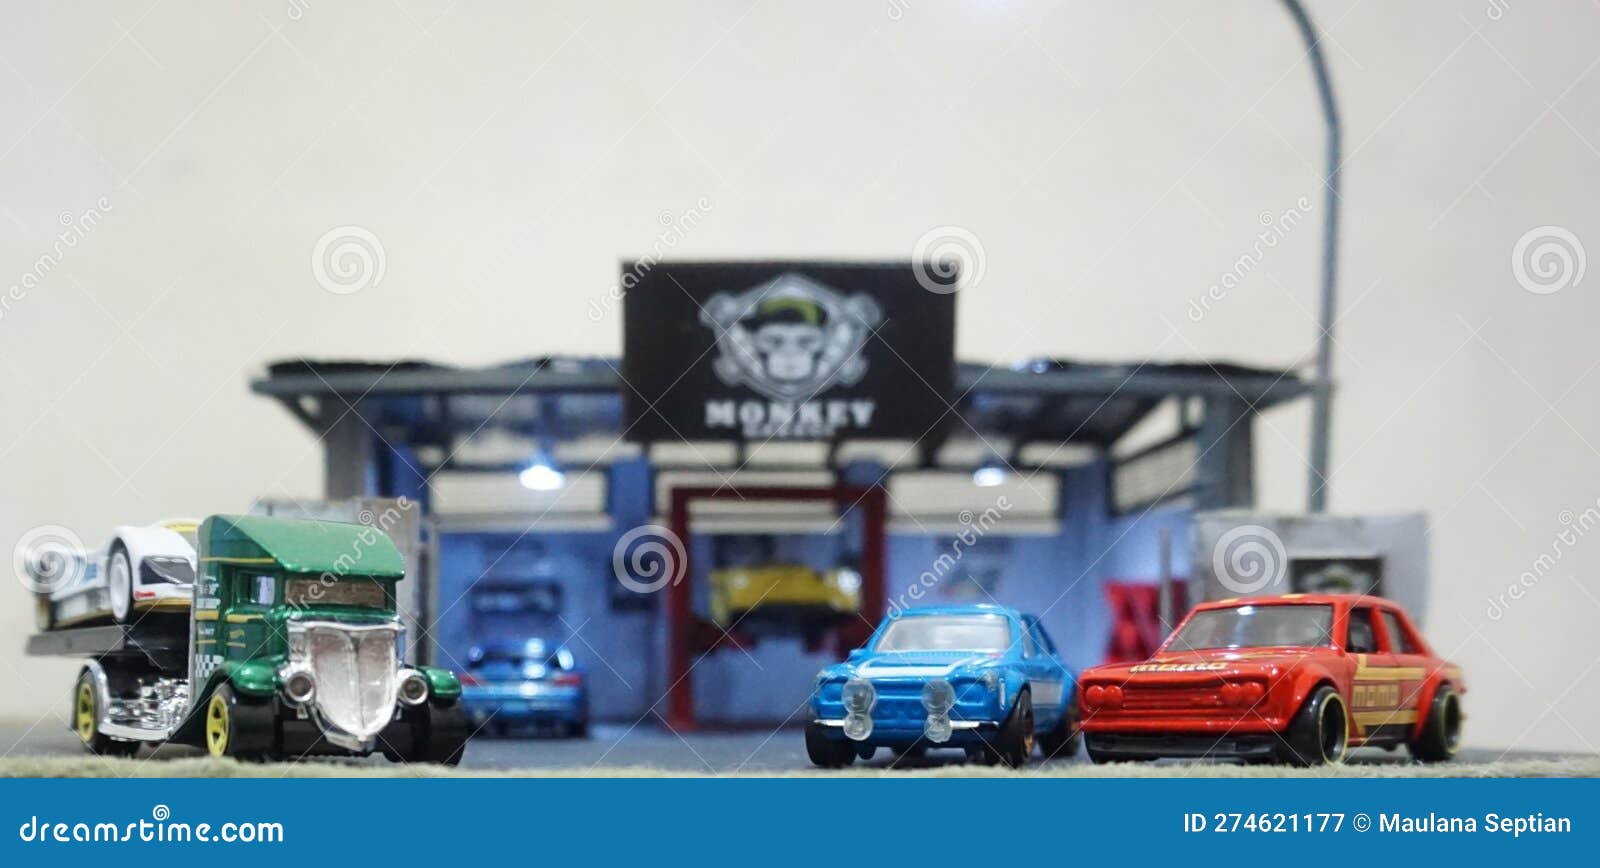 Toys Photography : Diorama Garage with Several Toy Cars Stock